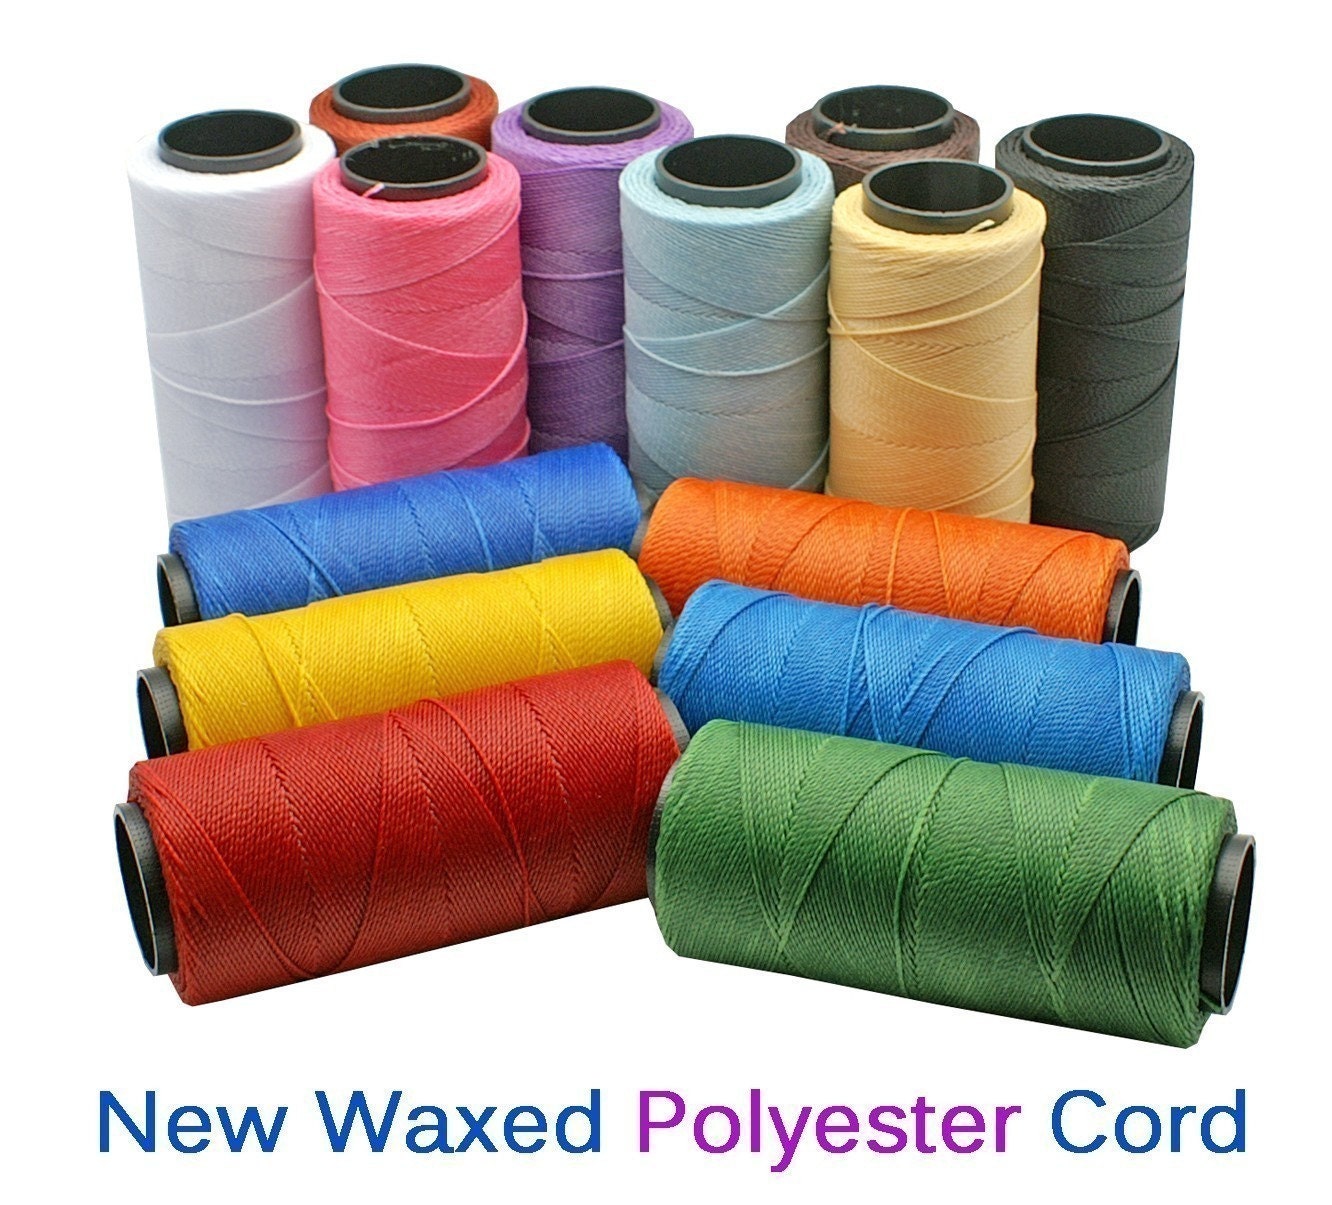 3MM Multi Colors Optional Strong Stretchy Nylon Cord Waxed Thread String  Strap For DIY Hair Rope Bracelet Necklace Jewelry Making